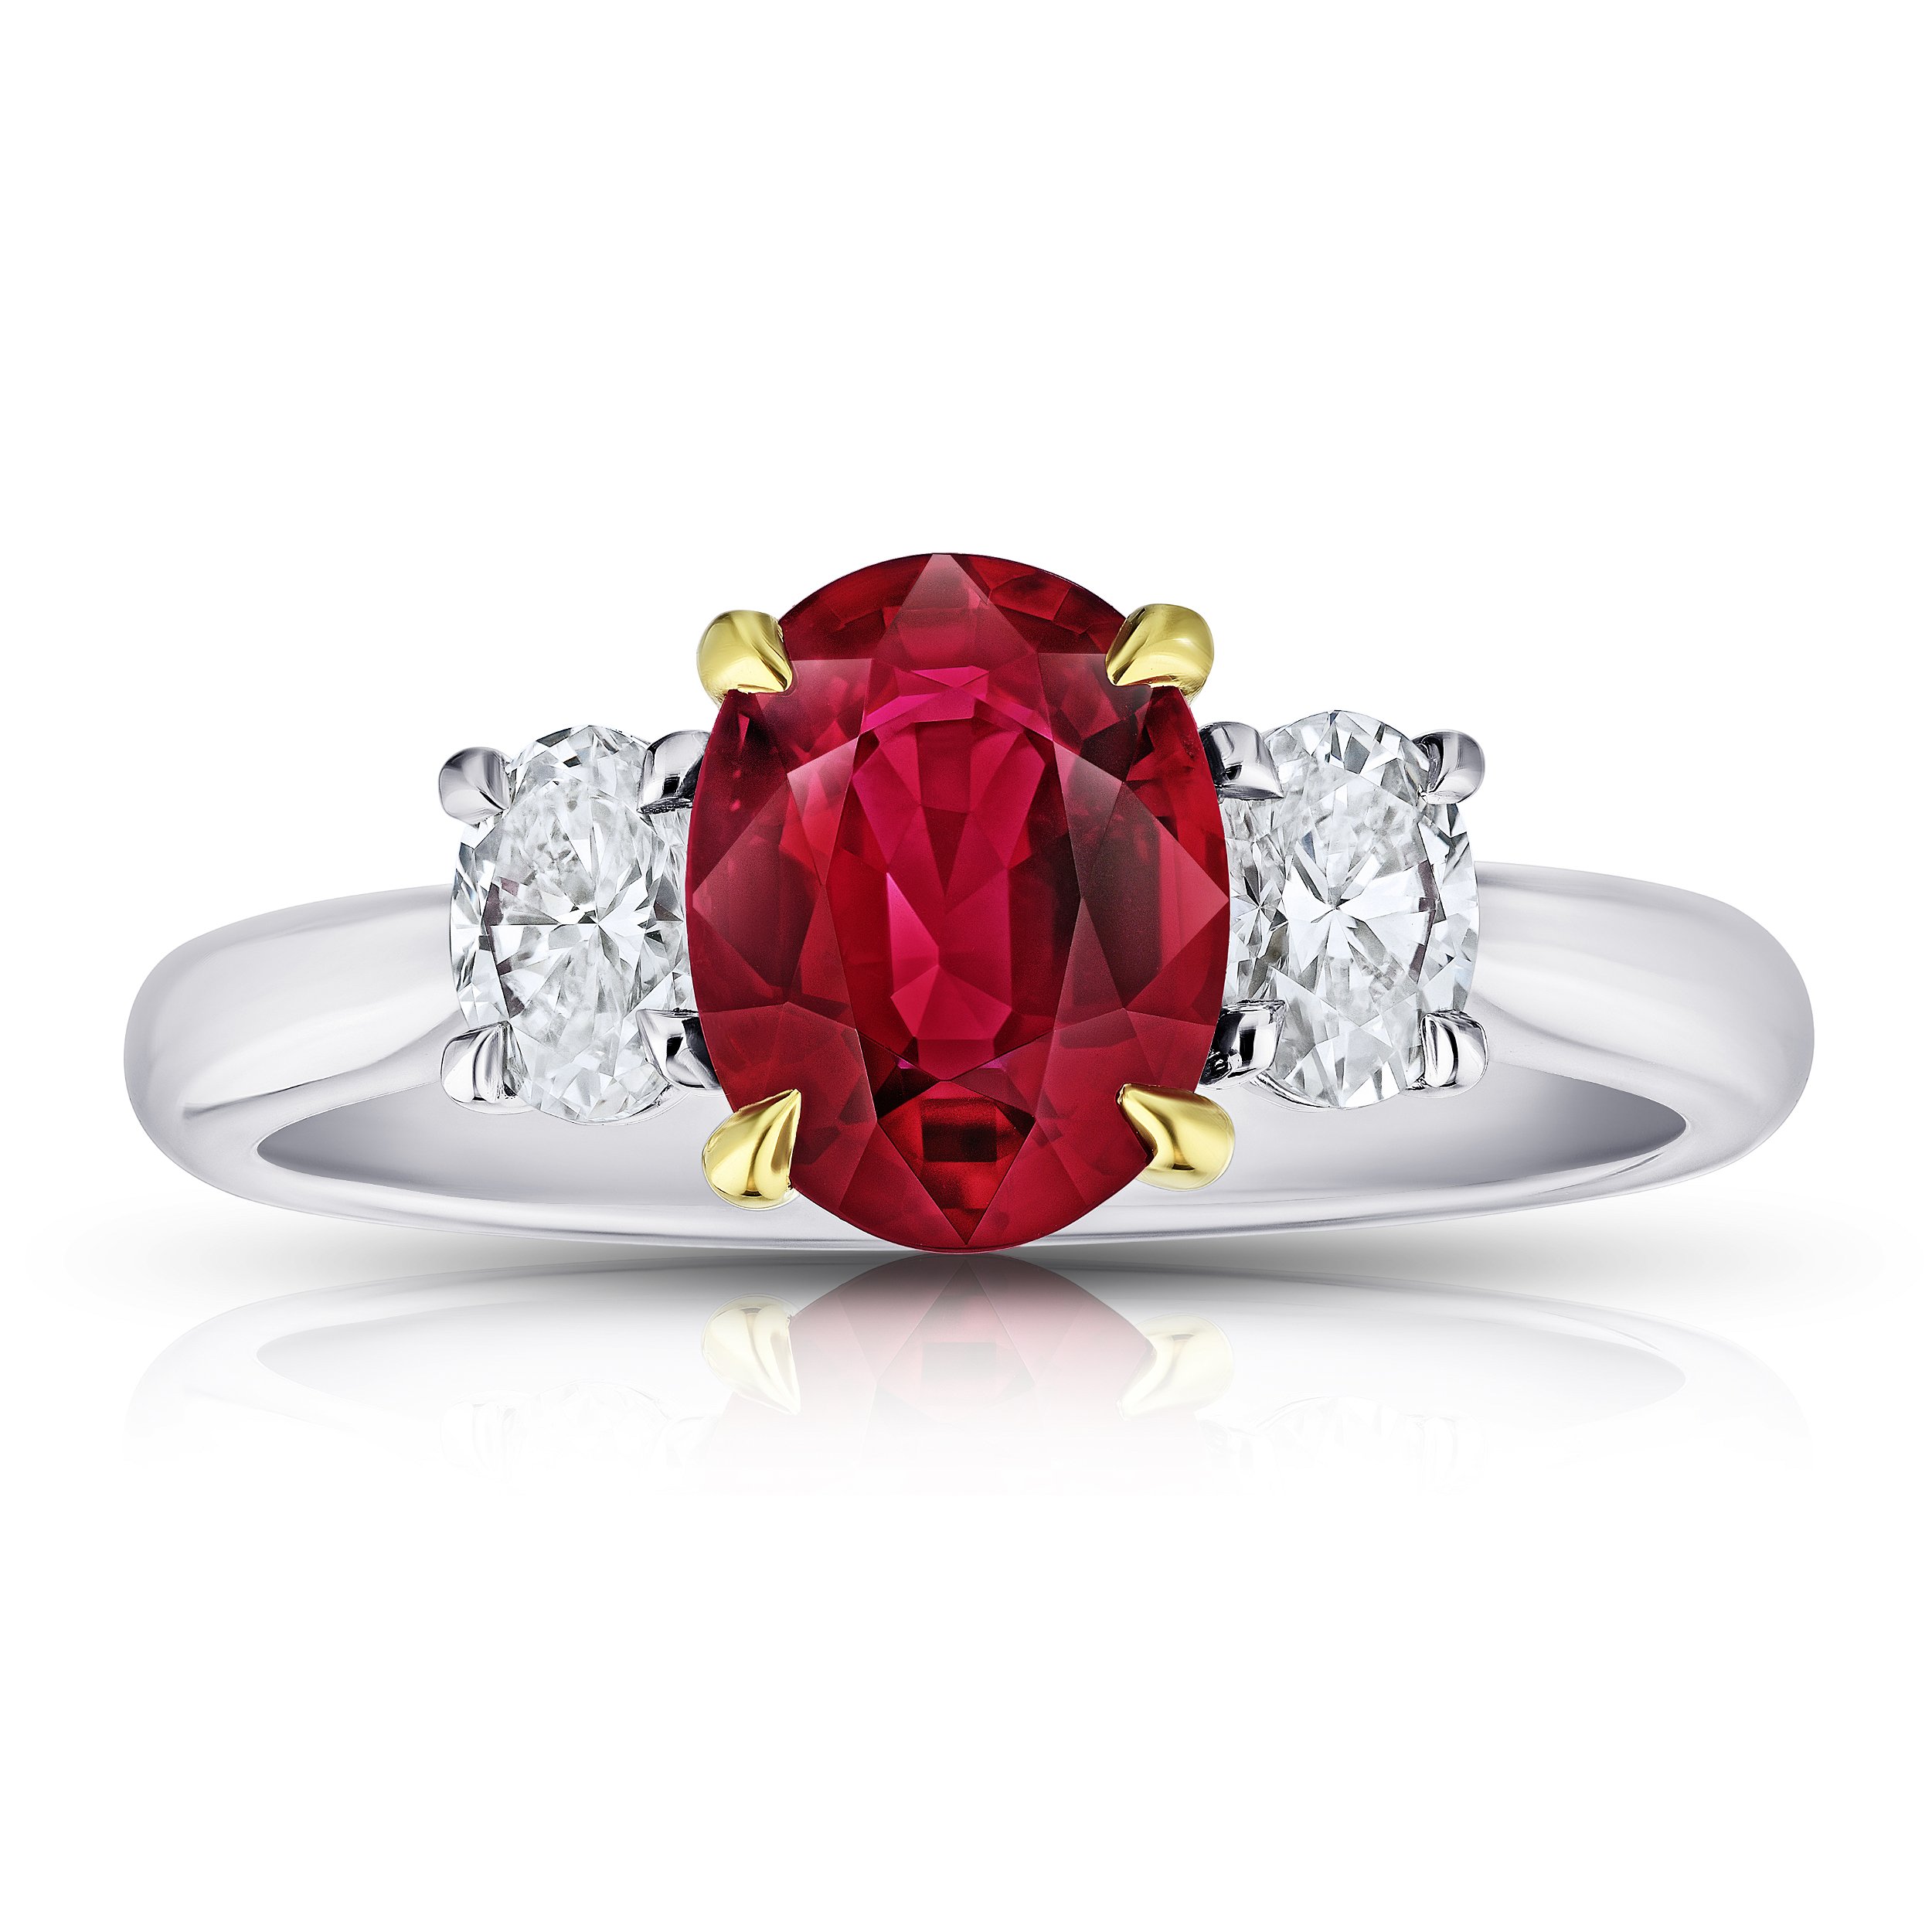 1.76 Carat Oval Red Ruby With Oval Diamonds Ring